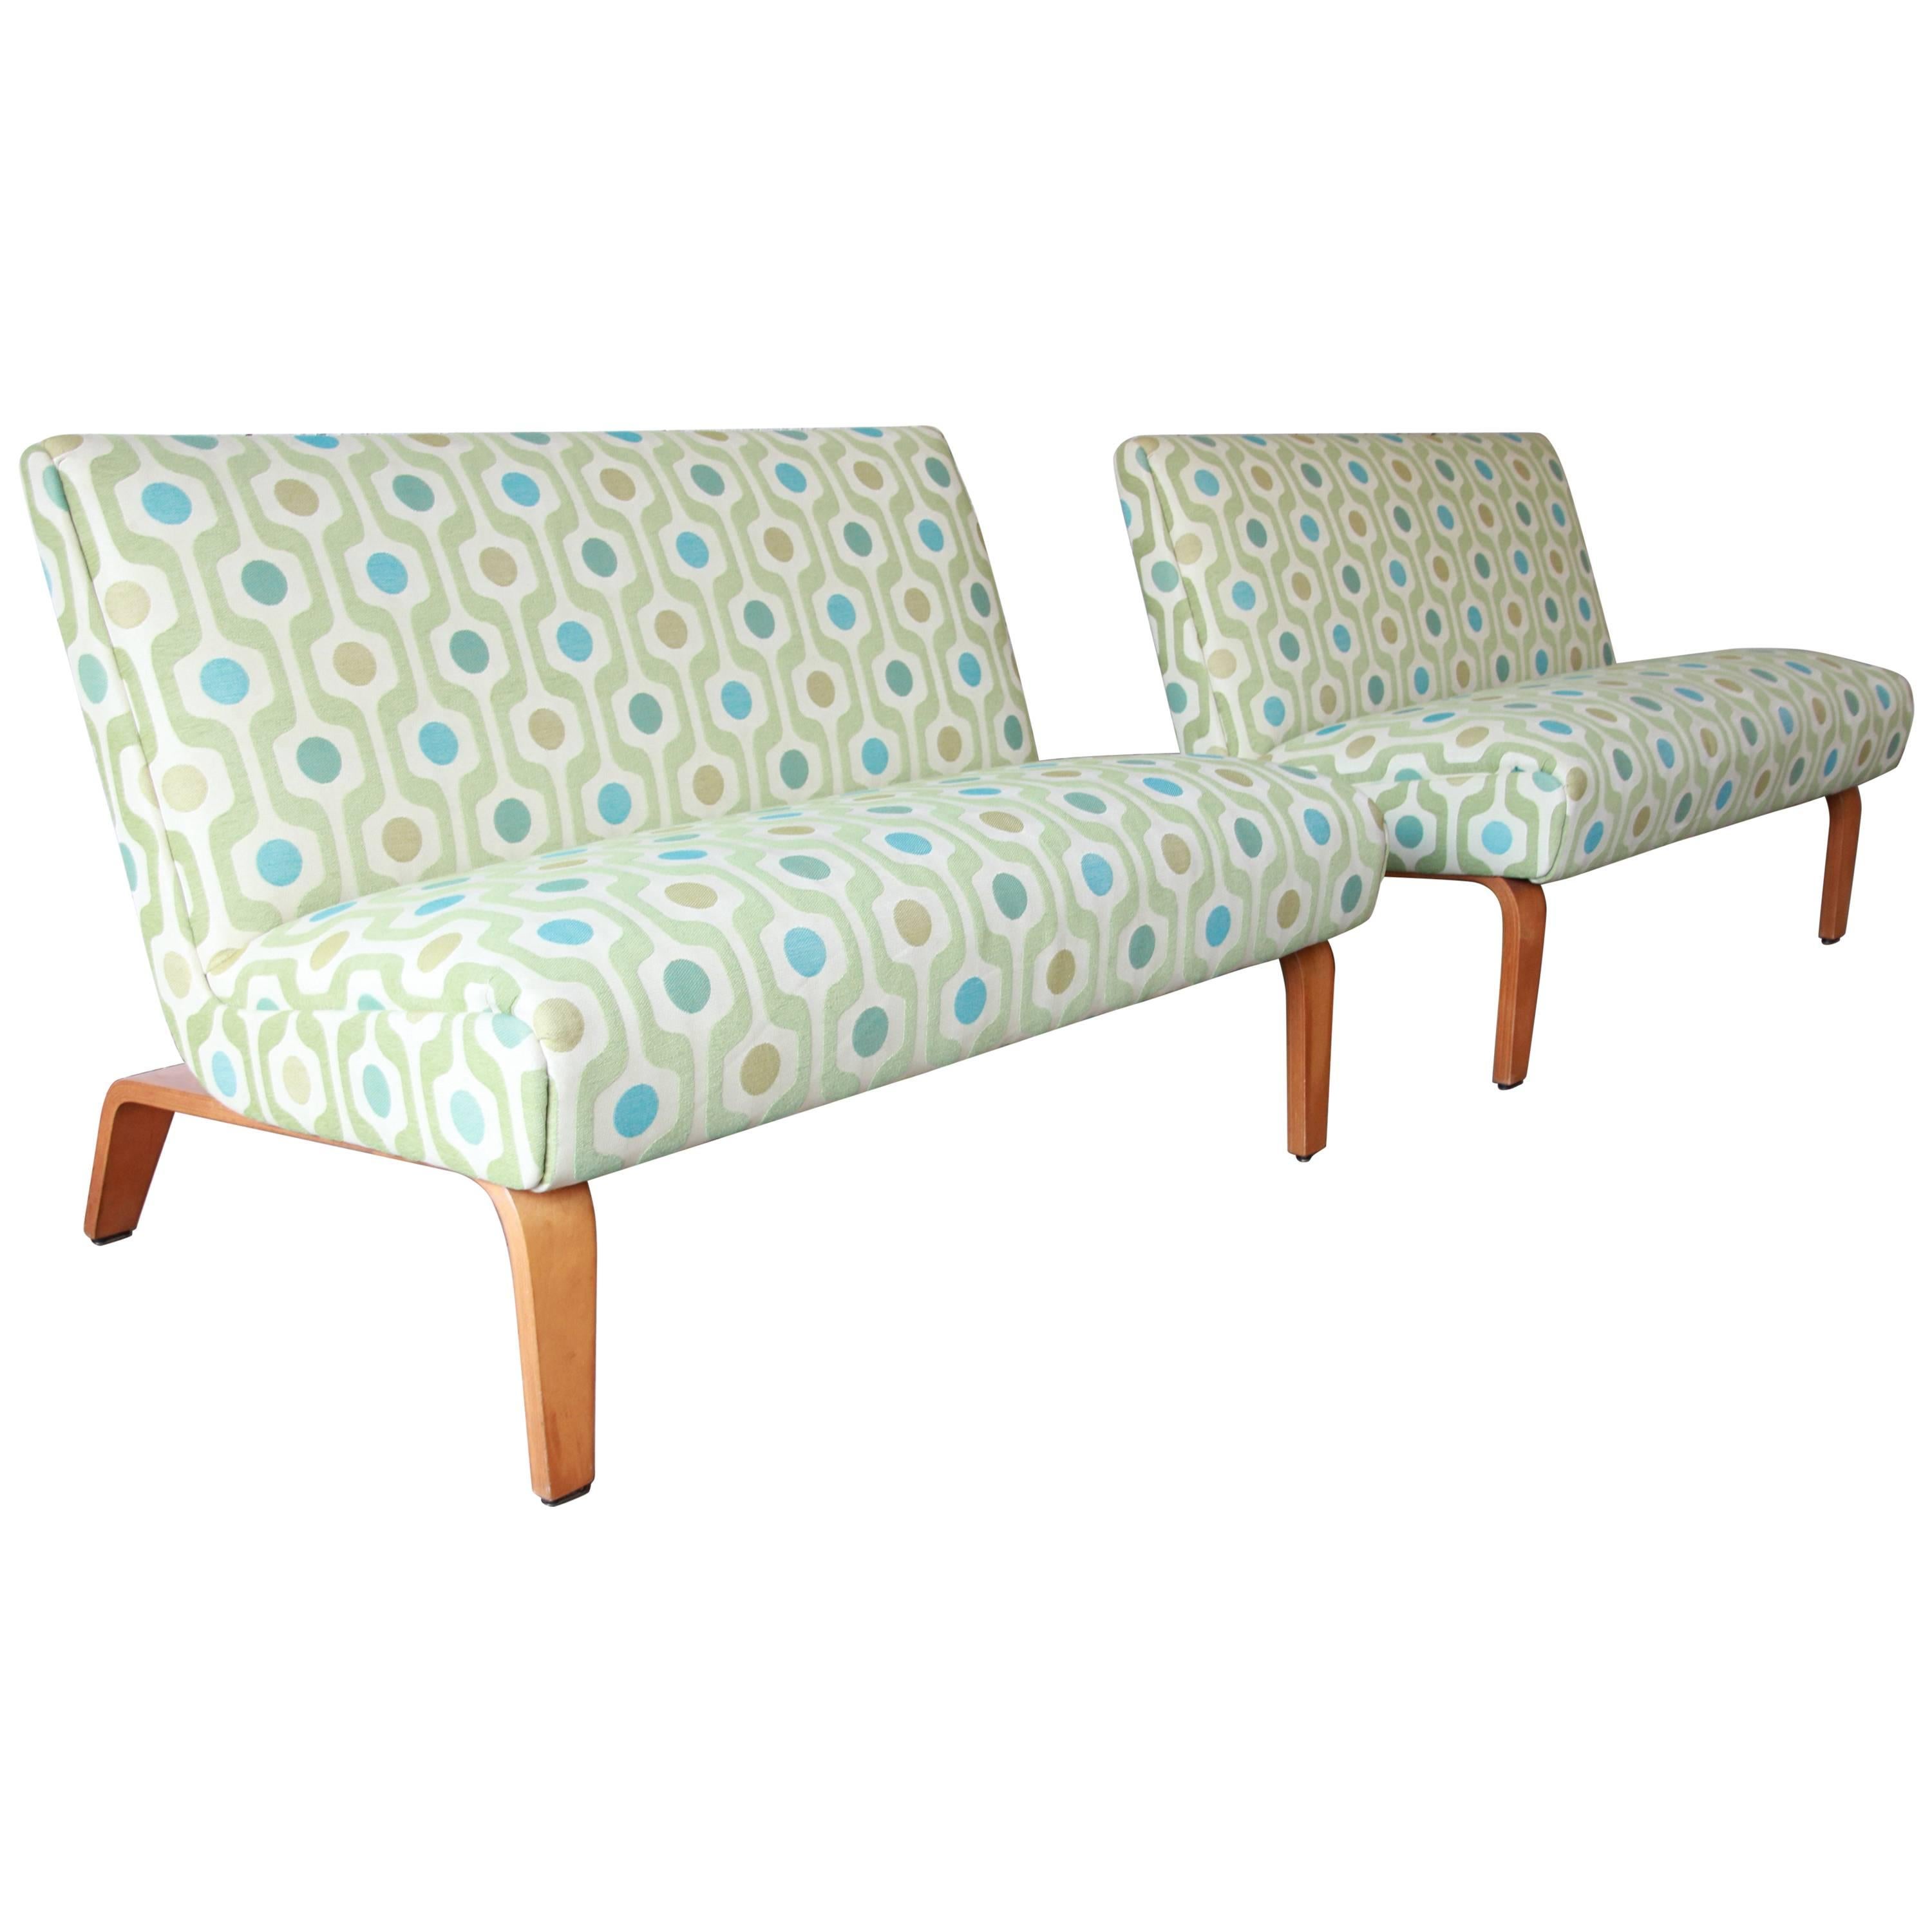 Pair of Mid-Century Modern Bentwood Settees by Thonet